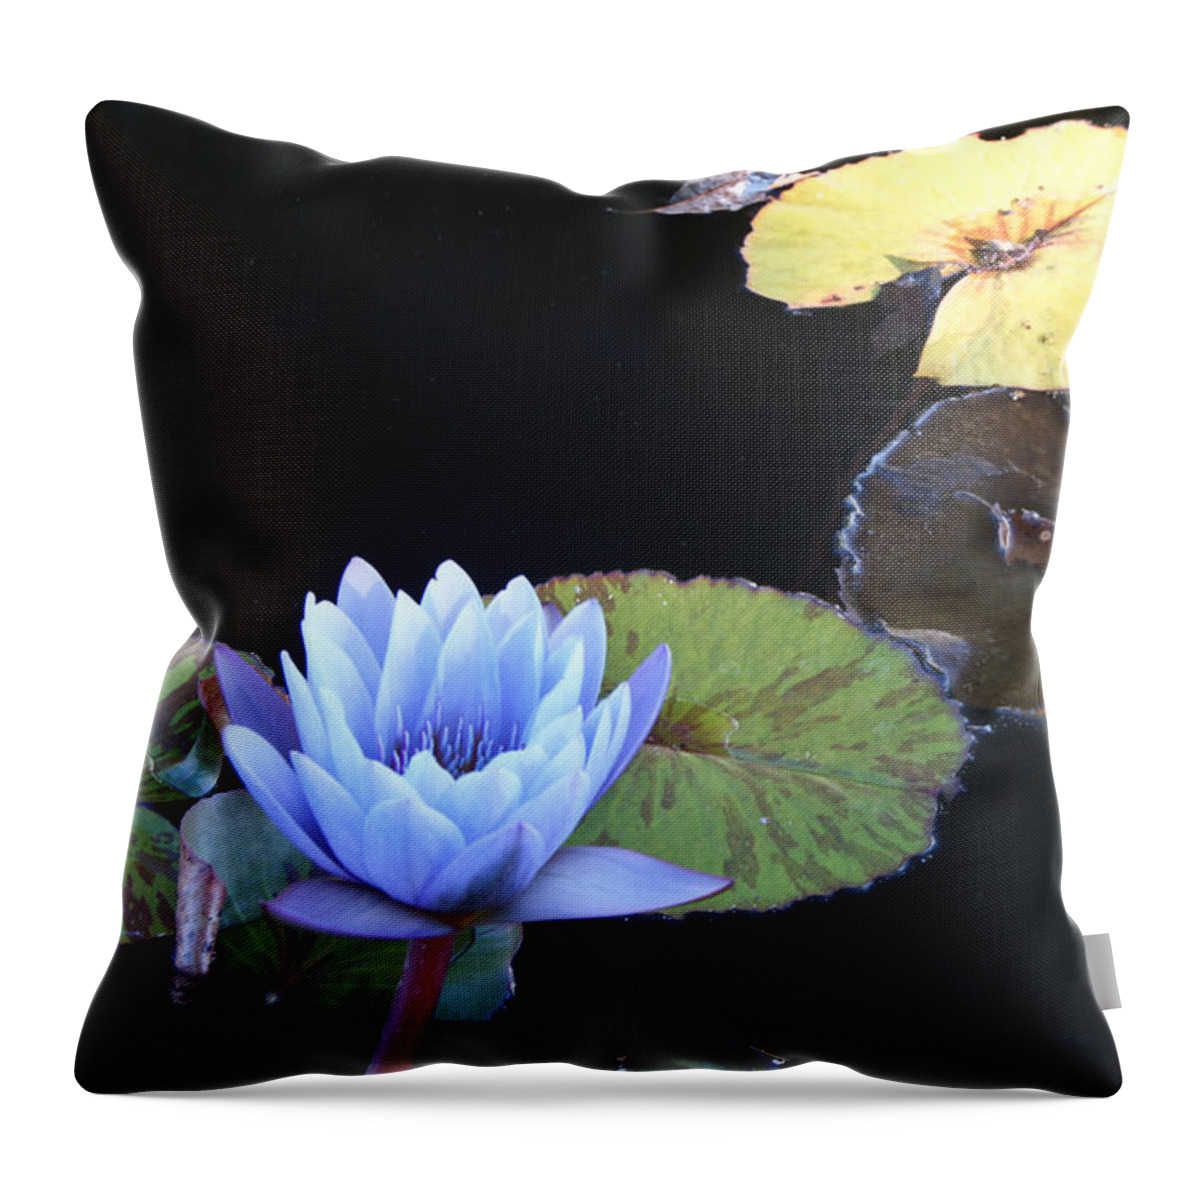 Ephemeral Throw Pillow featuring the photograph Ephemeral Ghostly Lily by Douglas Barnett